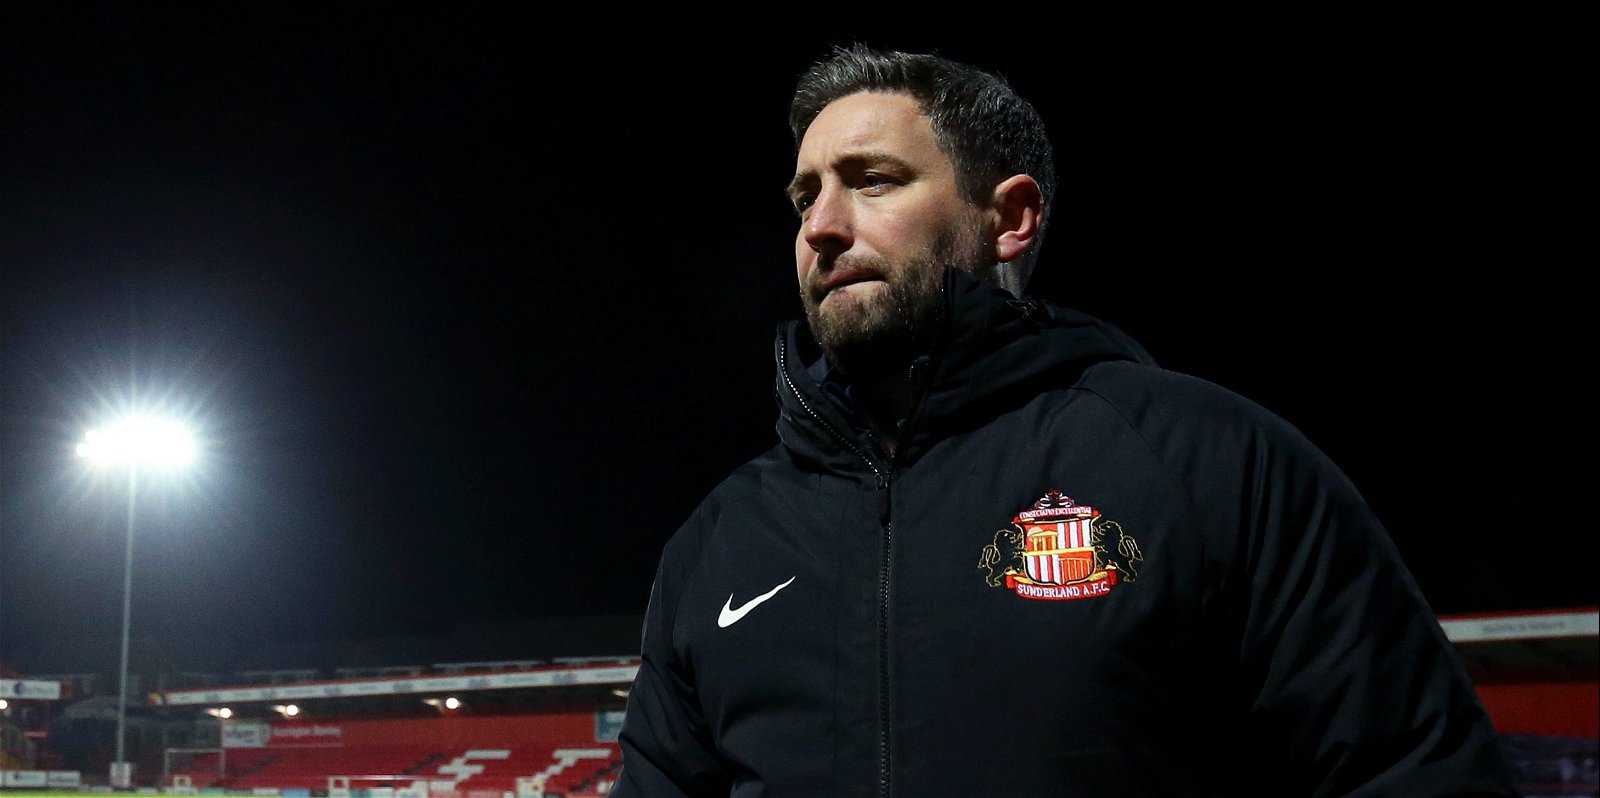 Sunderland, &#8216;Nothing to lose&#8217; &#8211; Sunderland backed by ex-player to make significant changes this summer